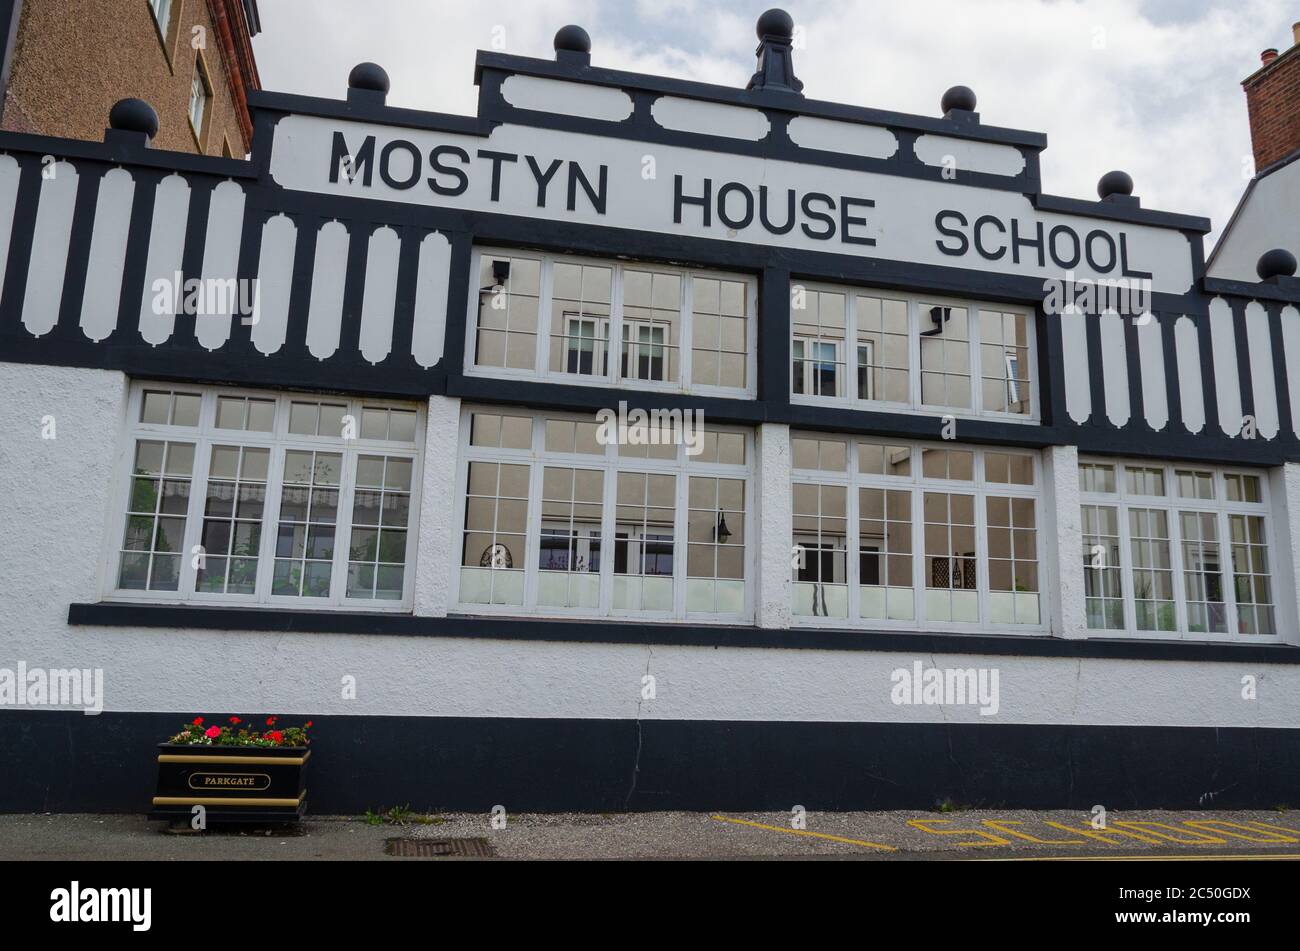 Parkgate, Wirral, UK: Jun 17, 2020: Mostyn House School was opened as a boys boarding school. Later it became a co-educational day school, run by the Stock Photo